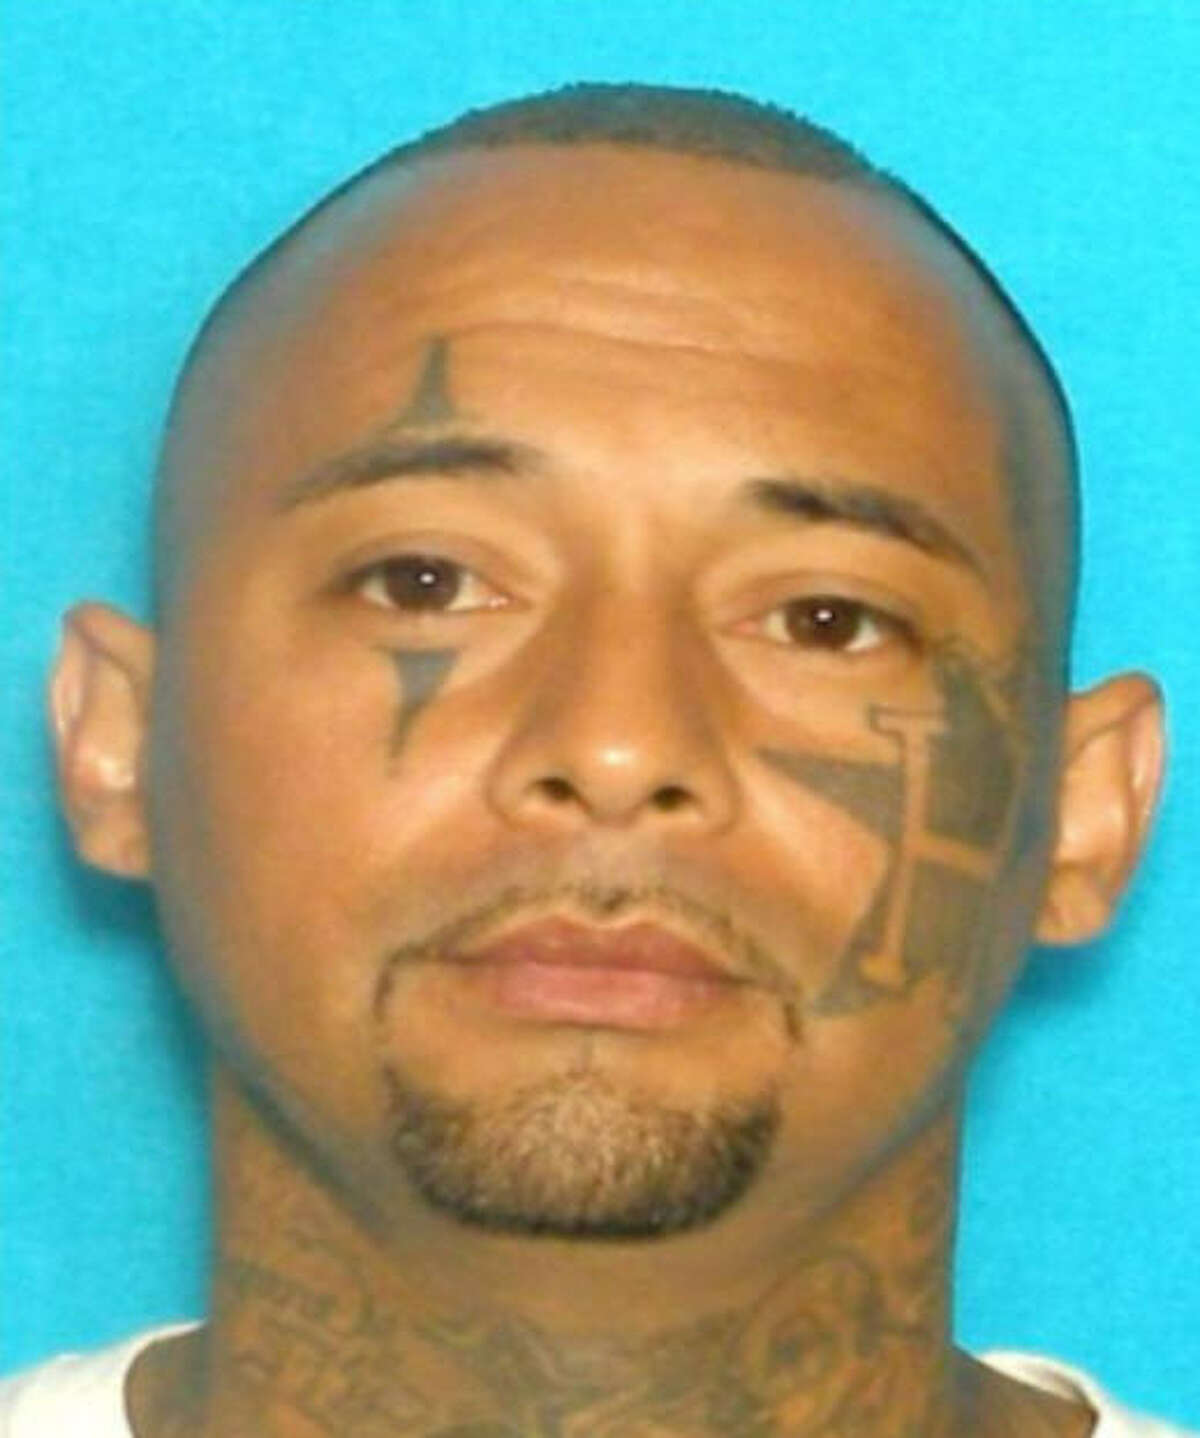 Jimmy Tony Sanchez was charged with aggravated kidnapping and aggravated robbery.